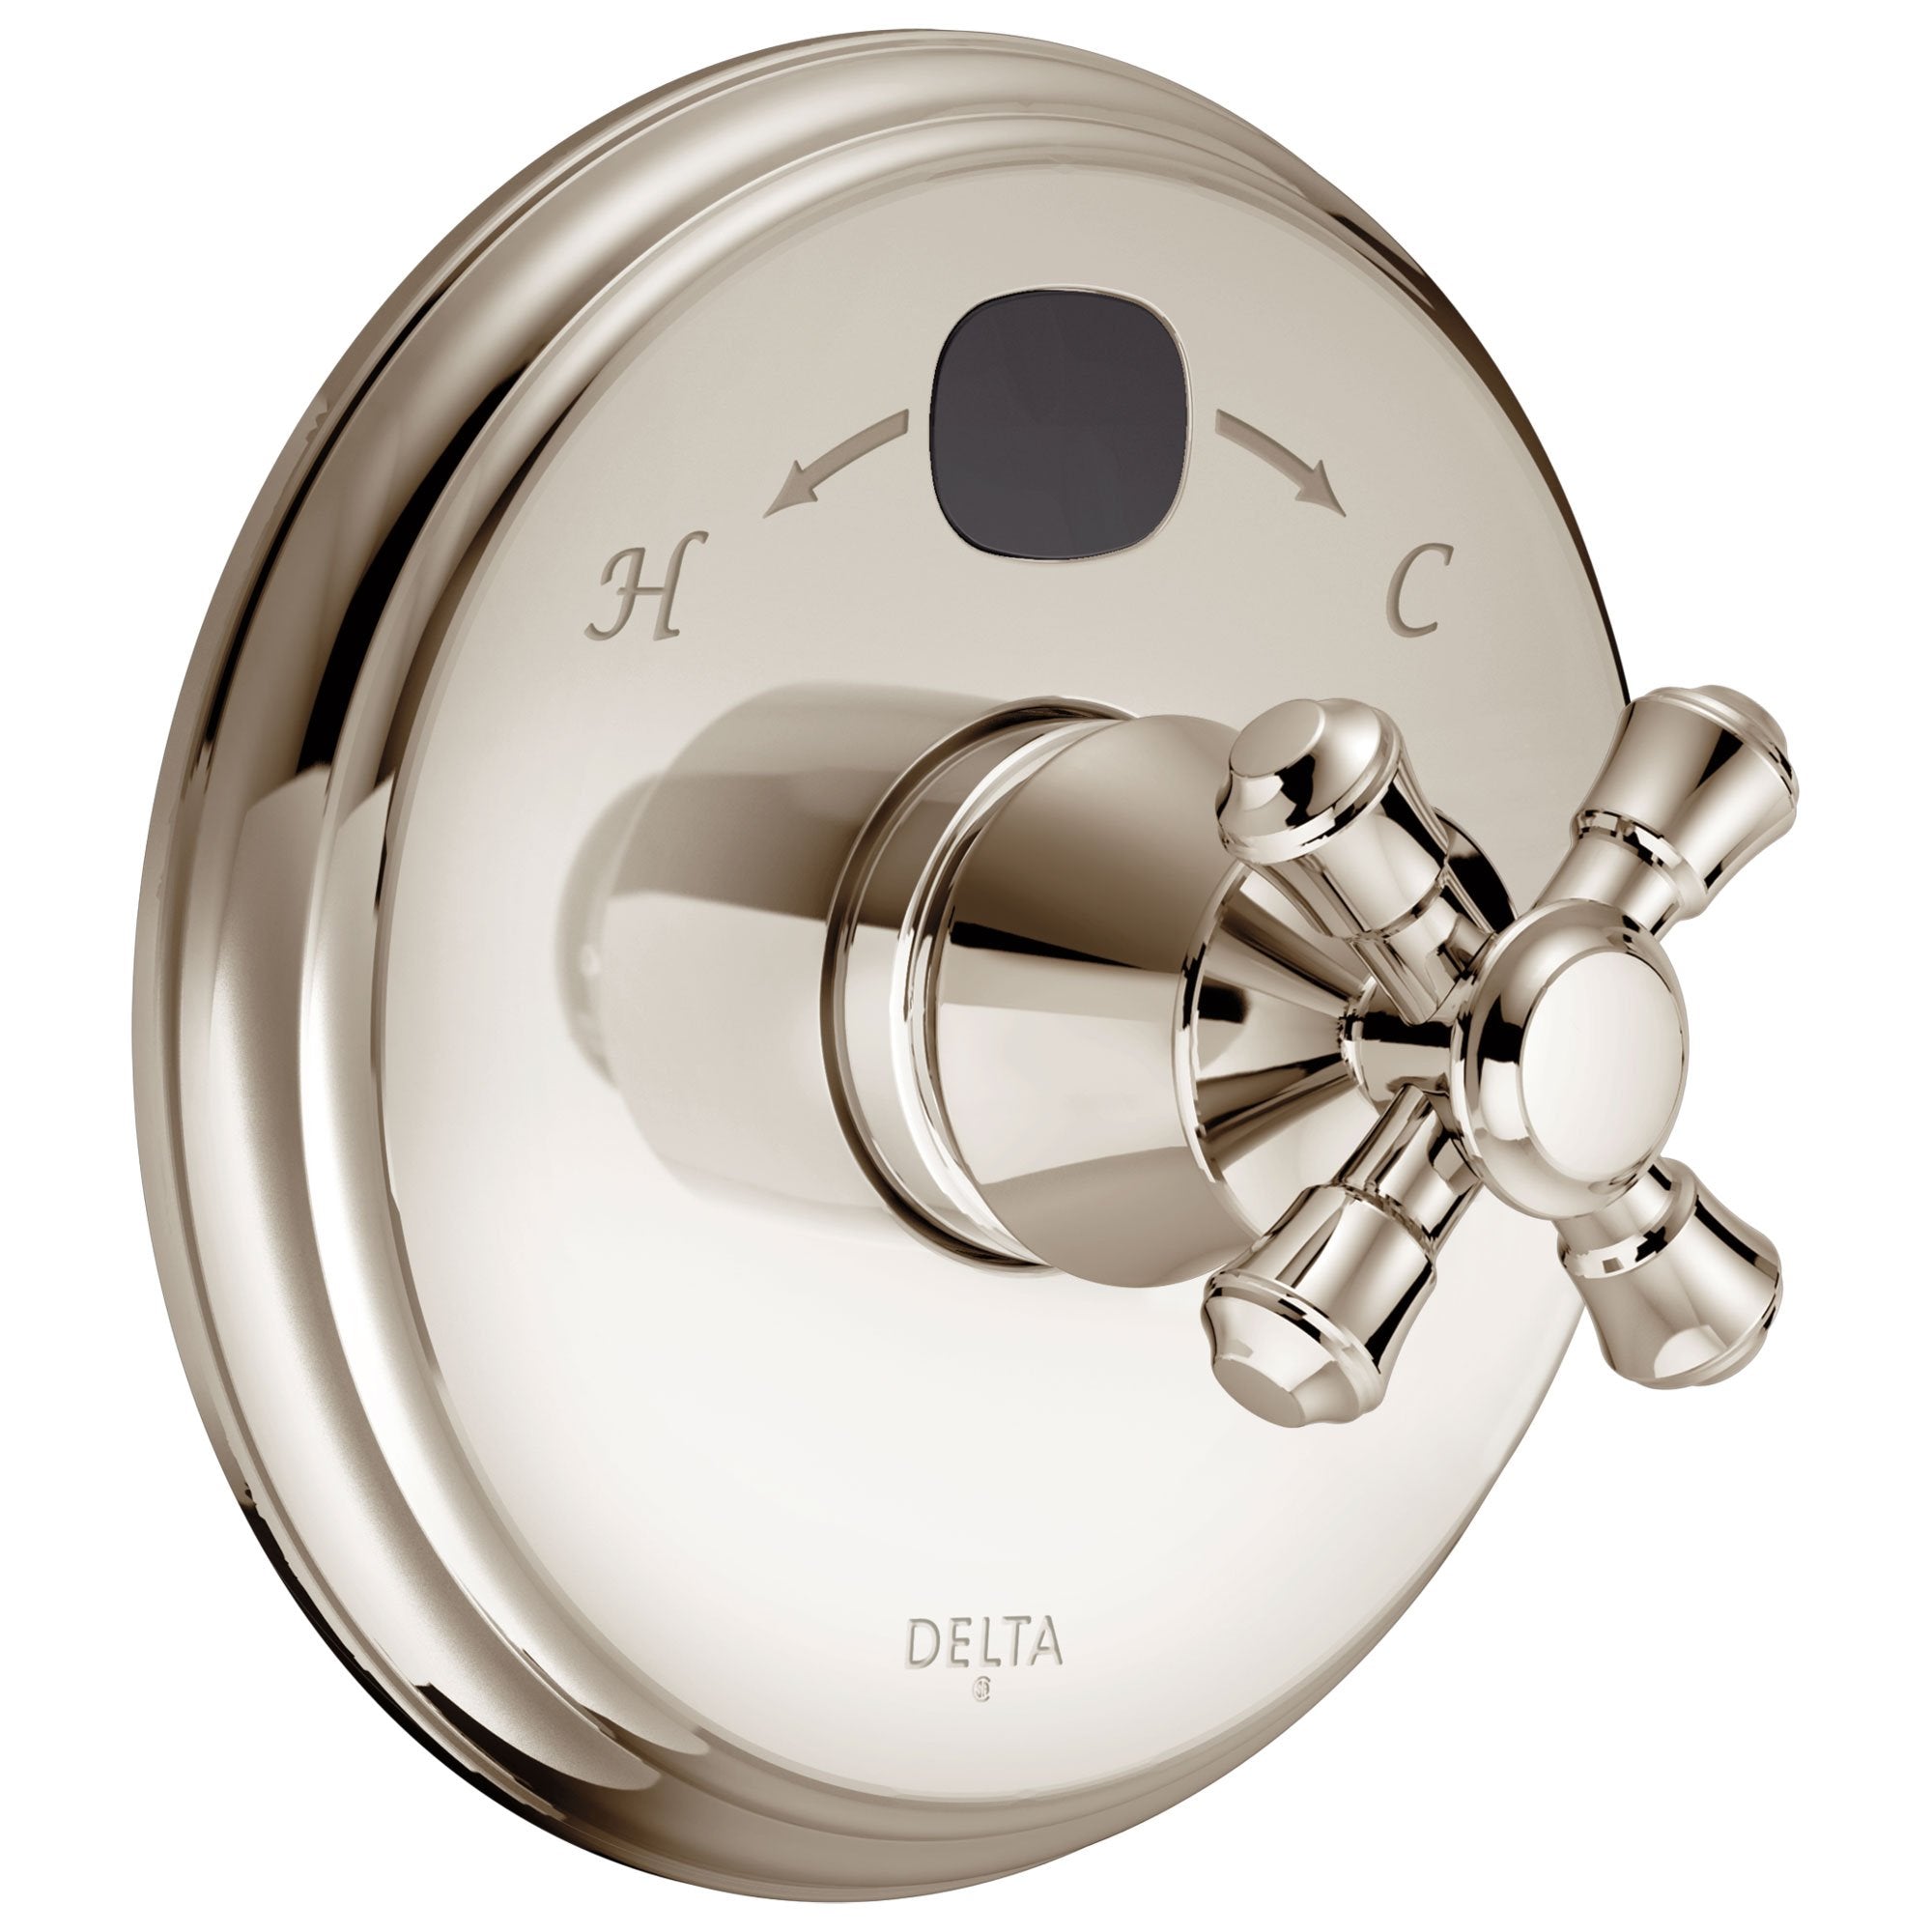 Delta Polished Nickel Cassidy 14 Series Digital Display Temp2O Shower Valve Control COMPLETE with Single Cross Handle and Rough-in Valve with Stops D1685V